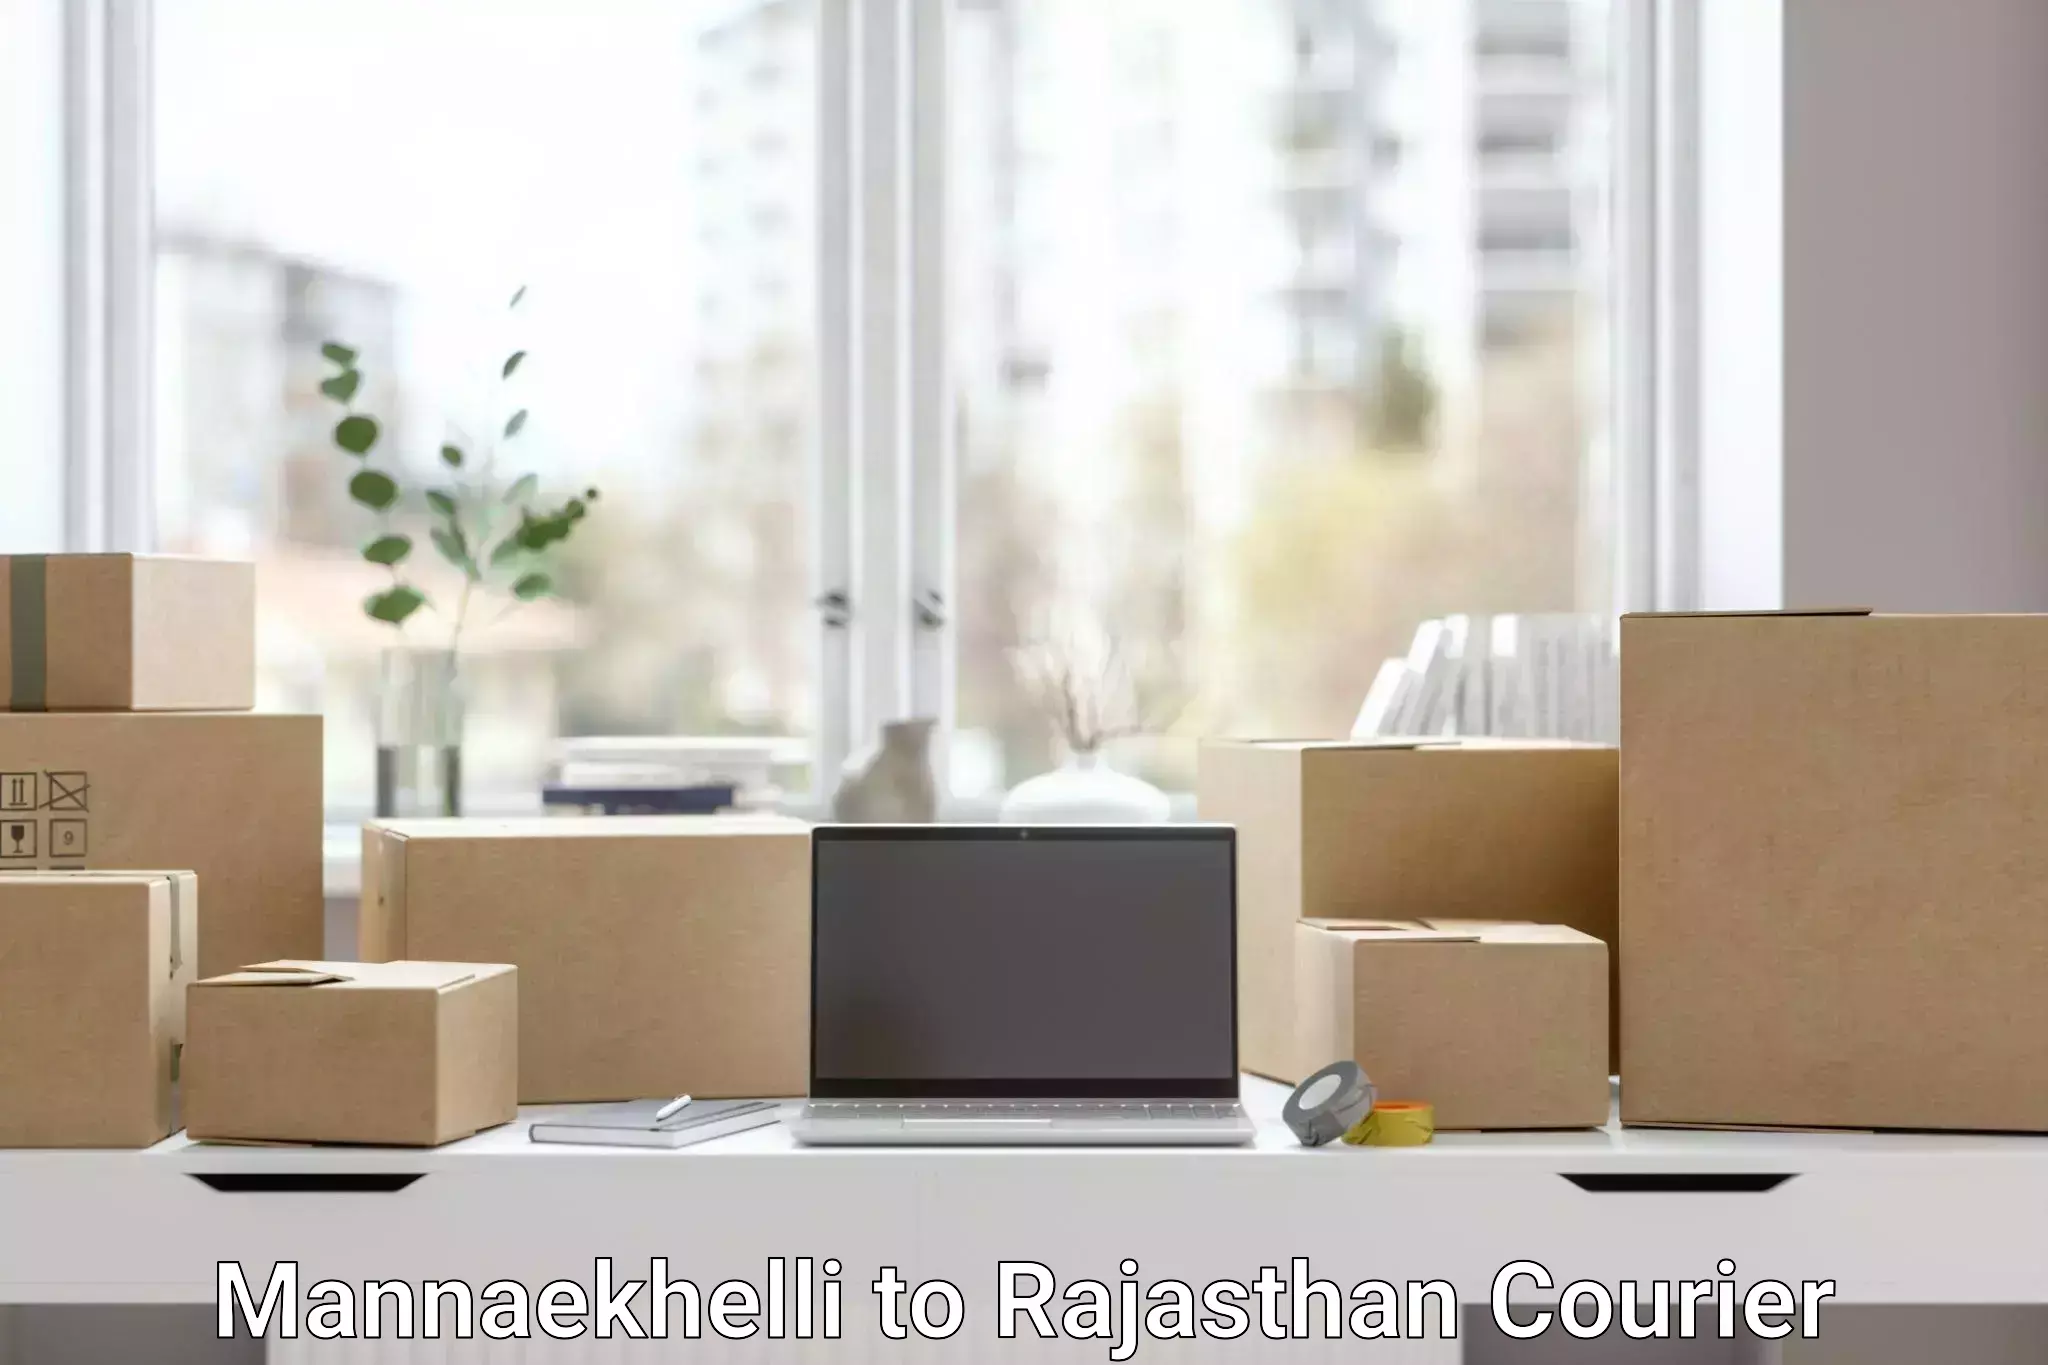 State-of-the-art courier technology Mannaekhelli to Lalsot